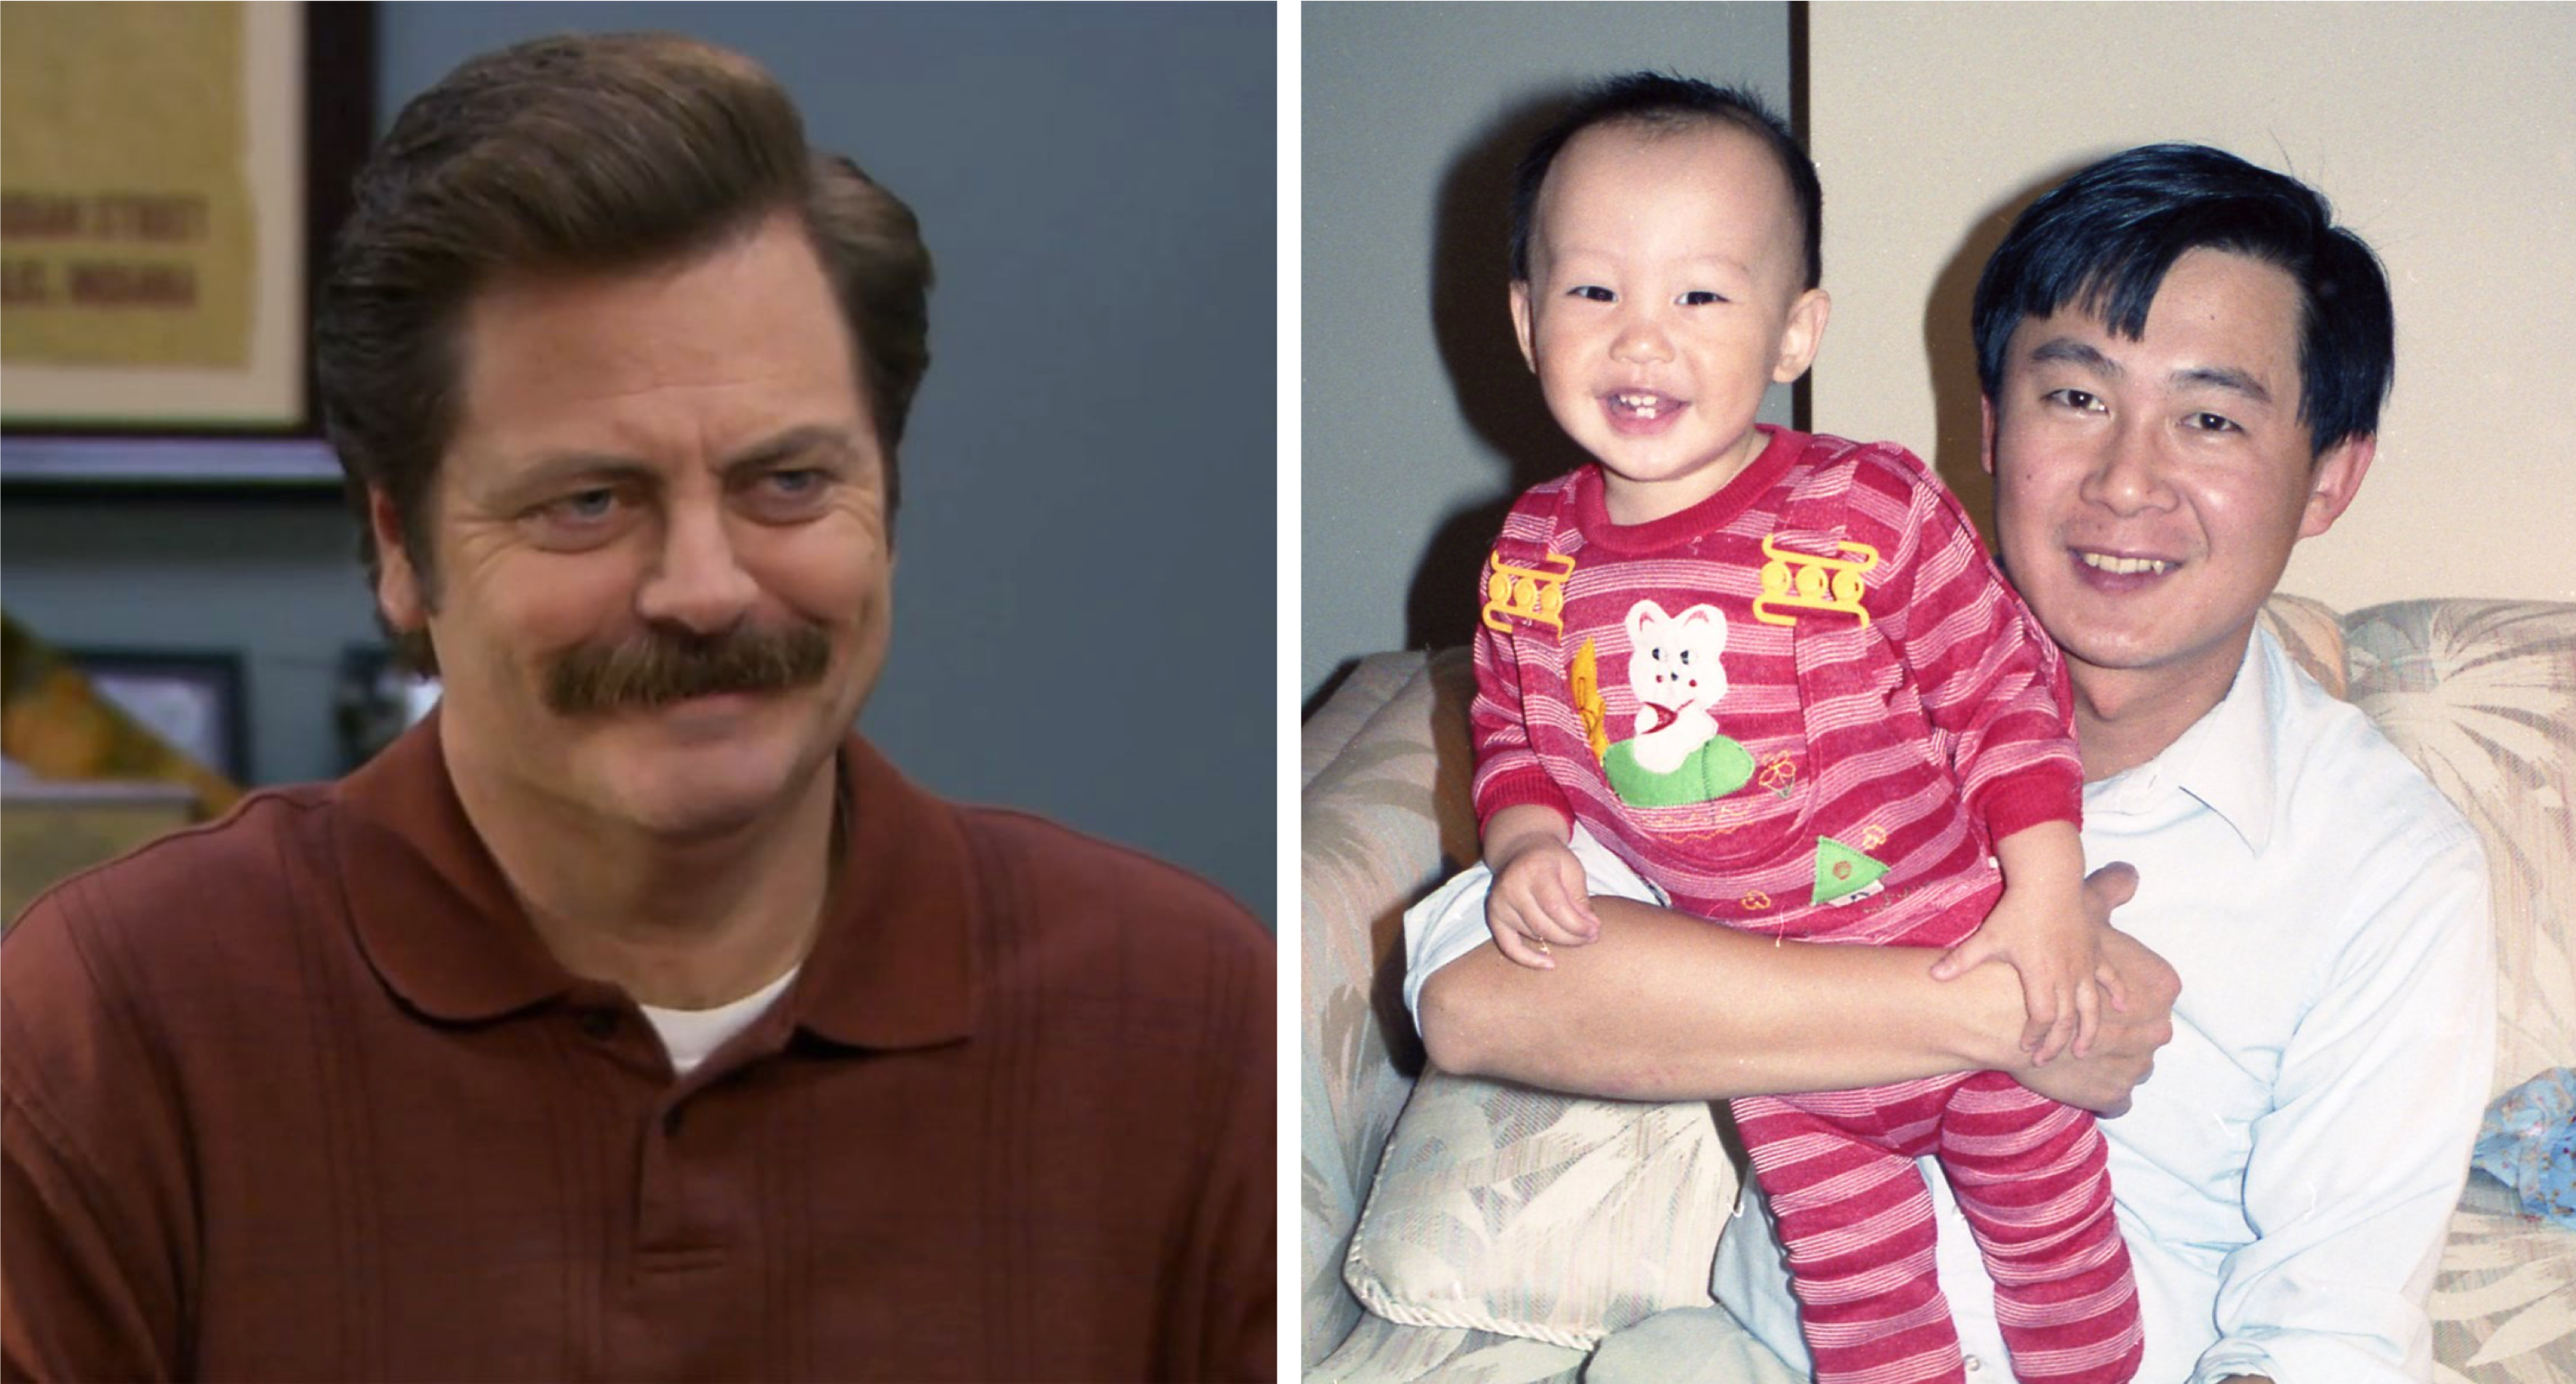 Son Lovingly Dubs Dad "Asian Ron Swanson" in Viral Father's Day Post